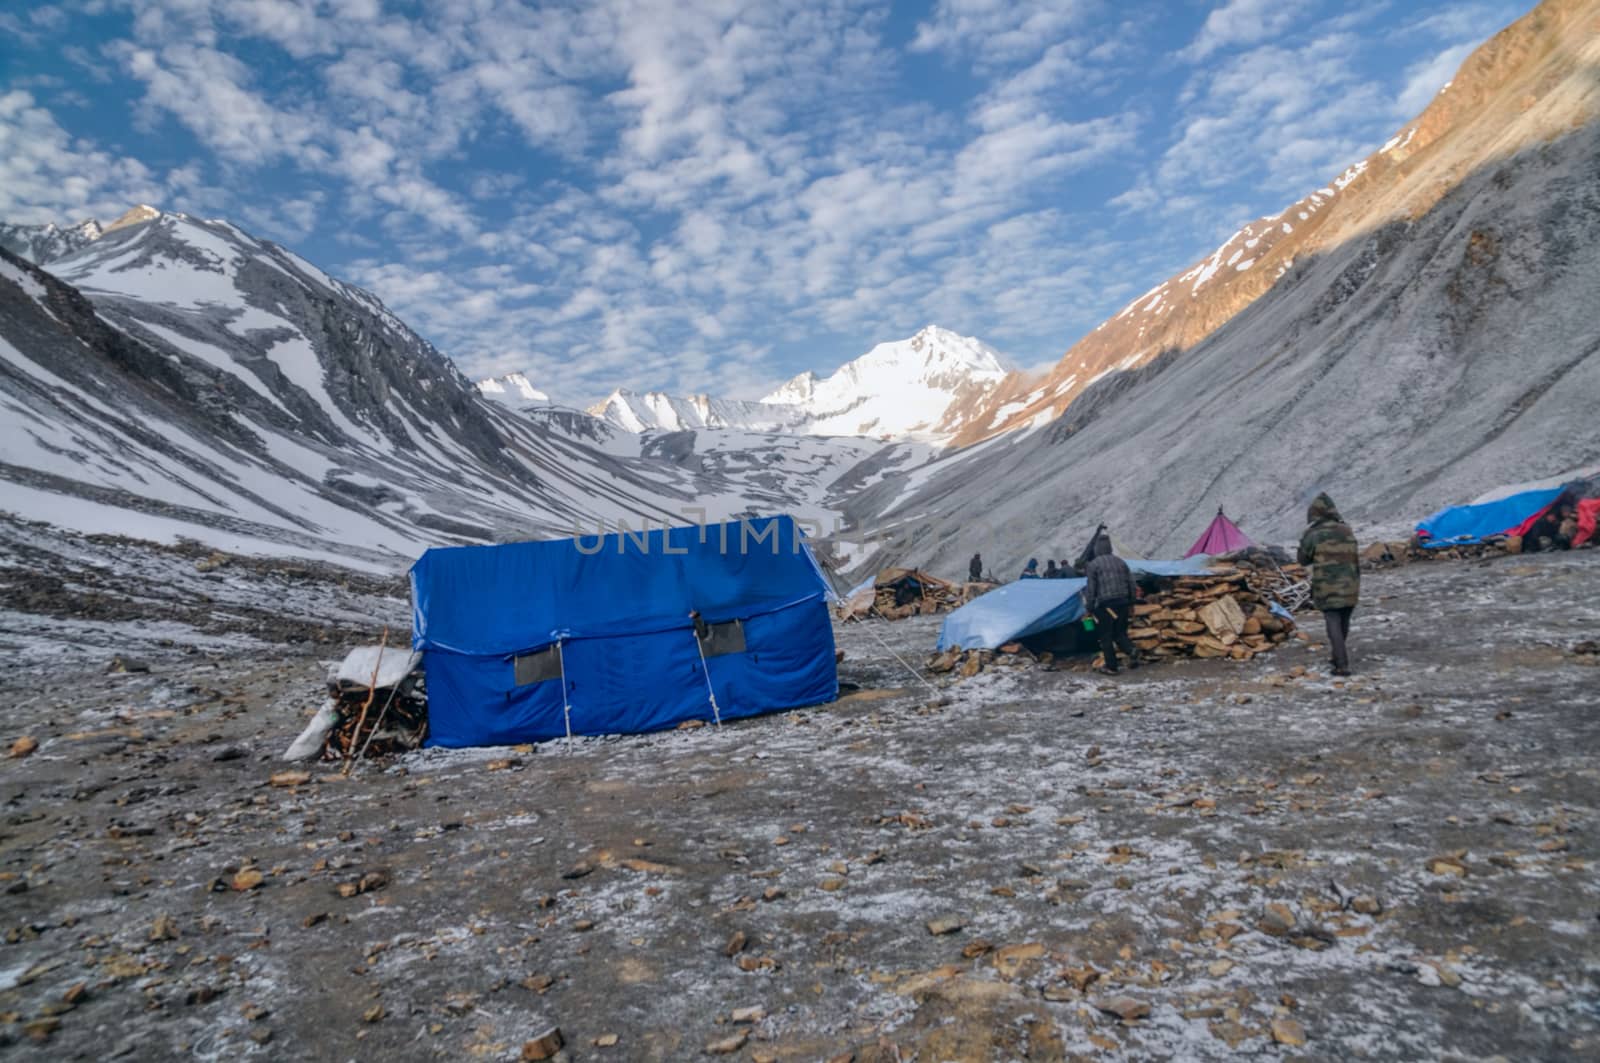 High altitude base camp in Himalayas mountains in Nepal